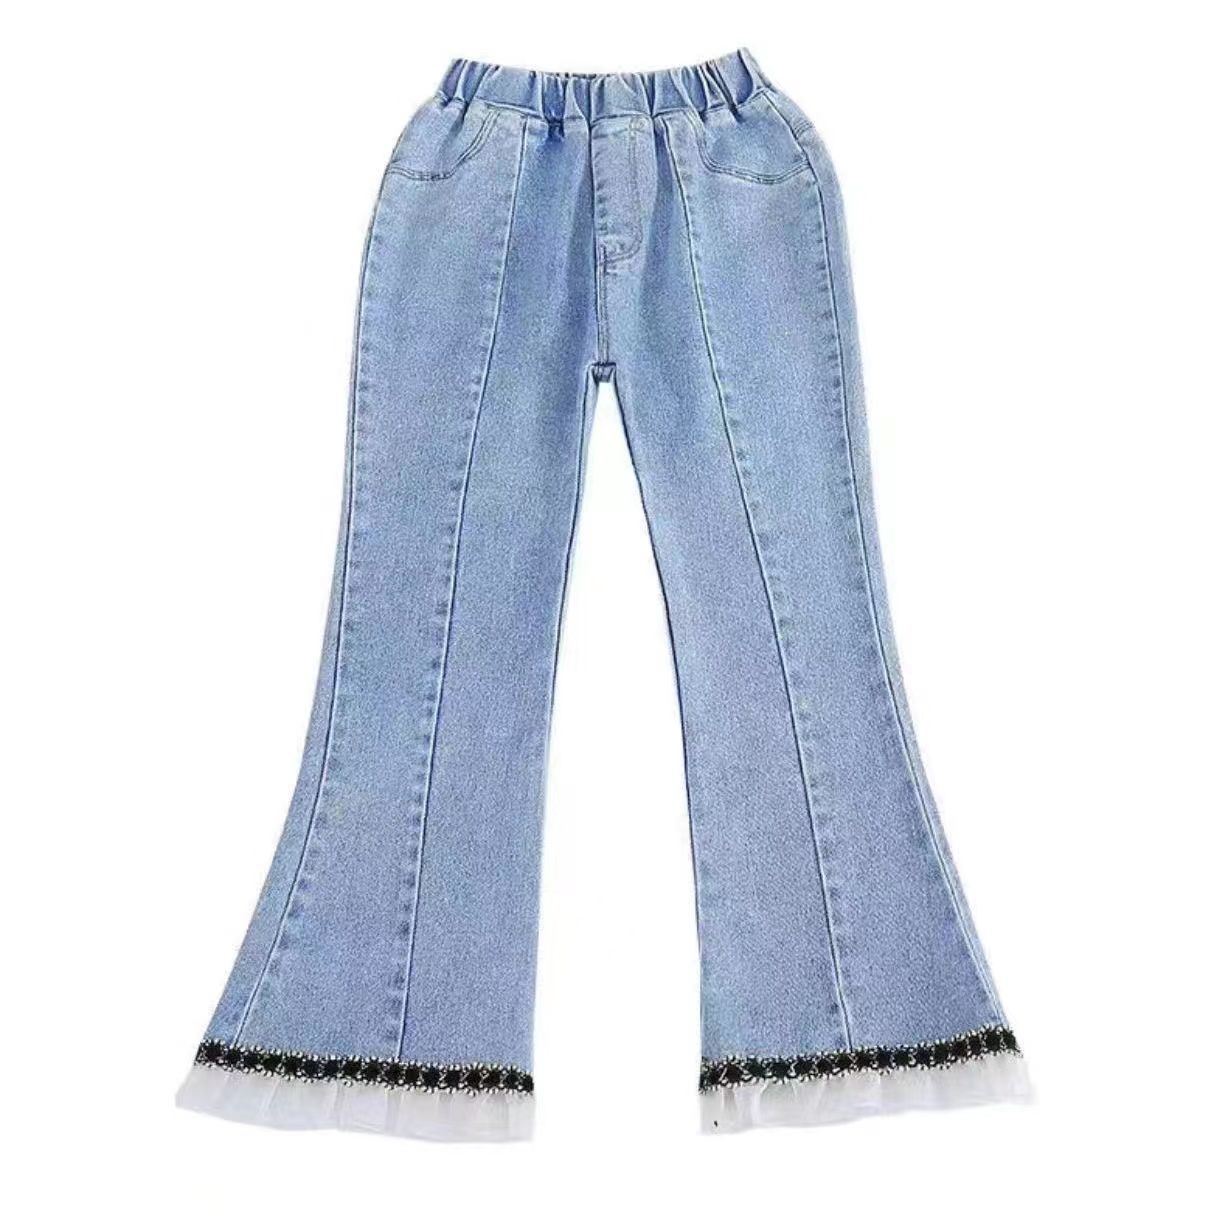  Spring and Autumn New Girls' Western Style Fashionable Jeans Children's Slim Flared Pants Baby Elastic Outerwear Pants